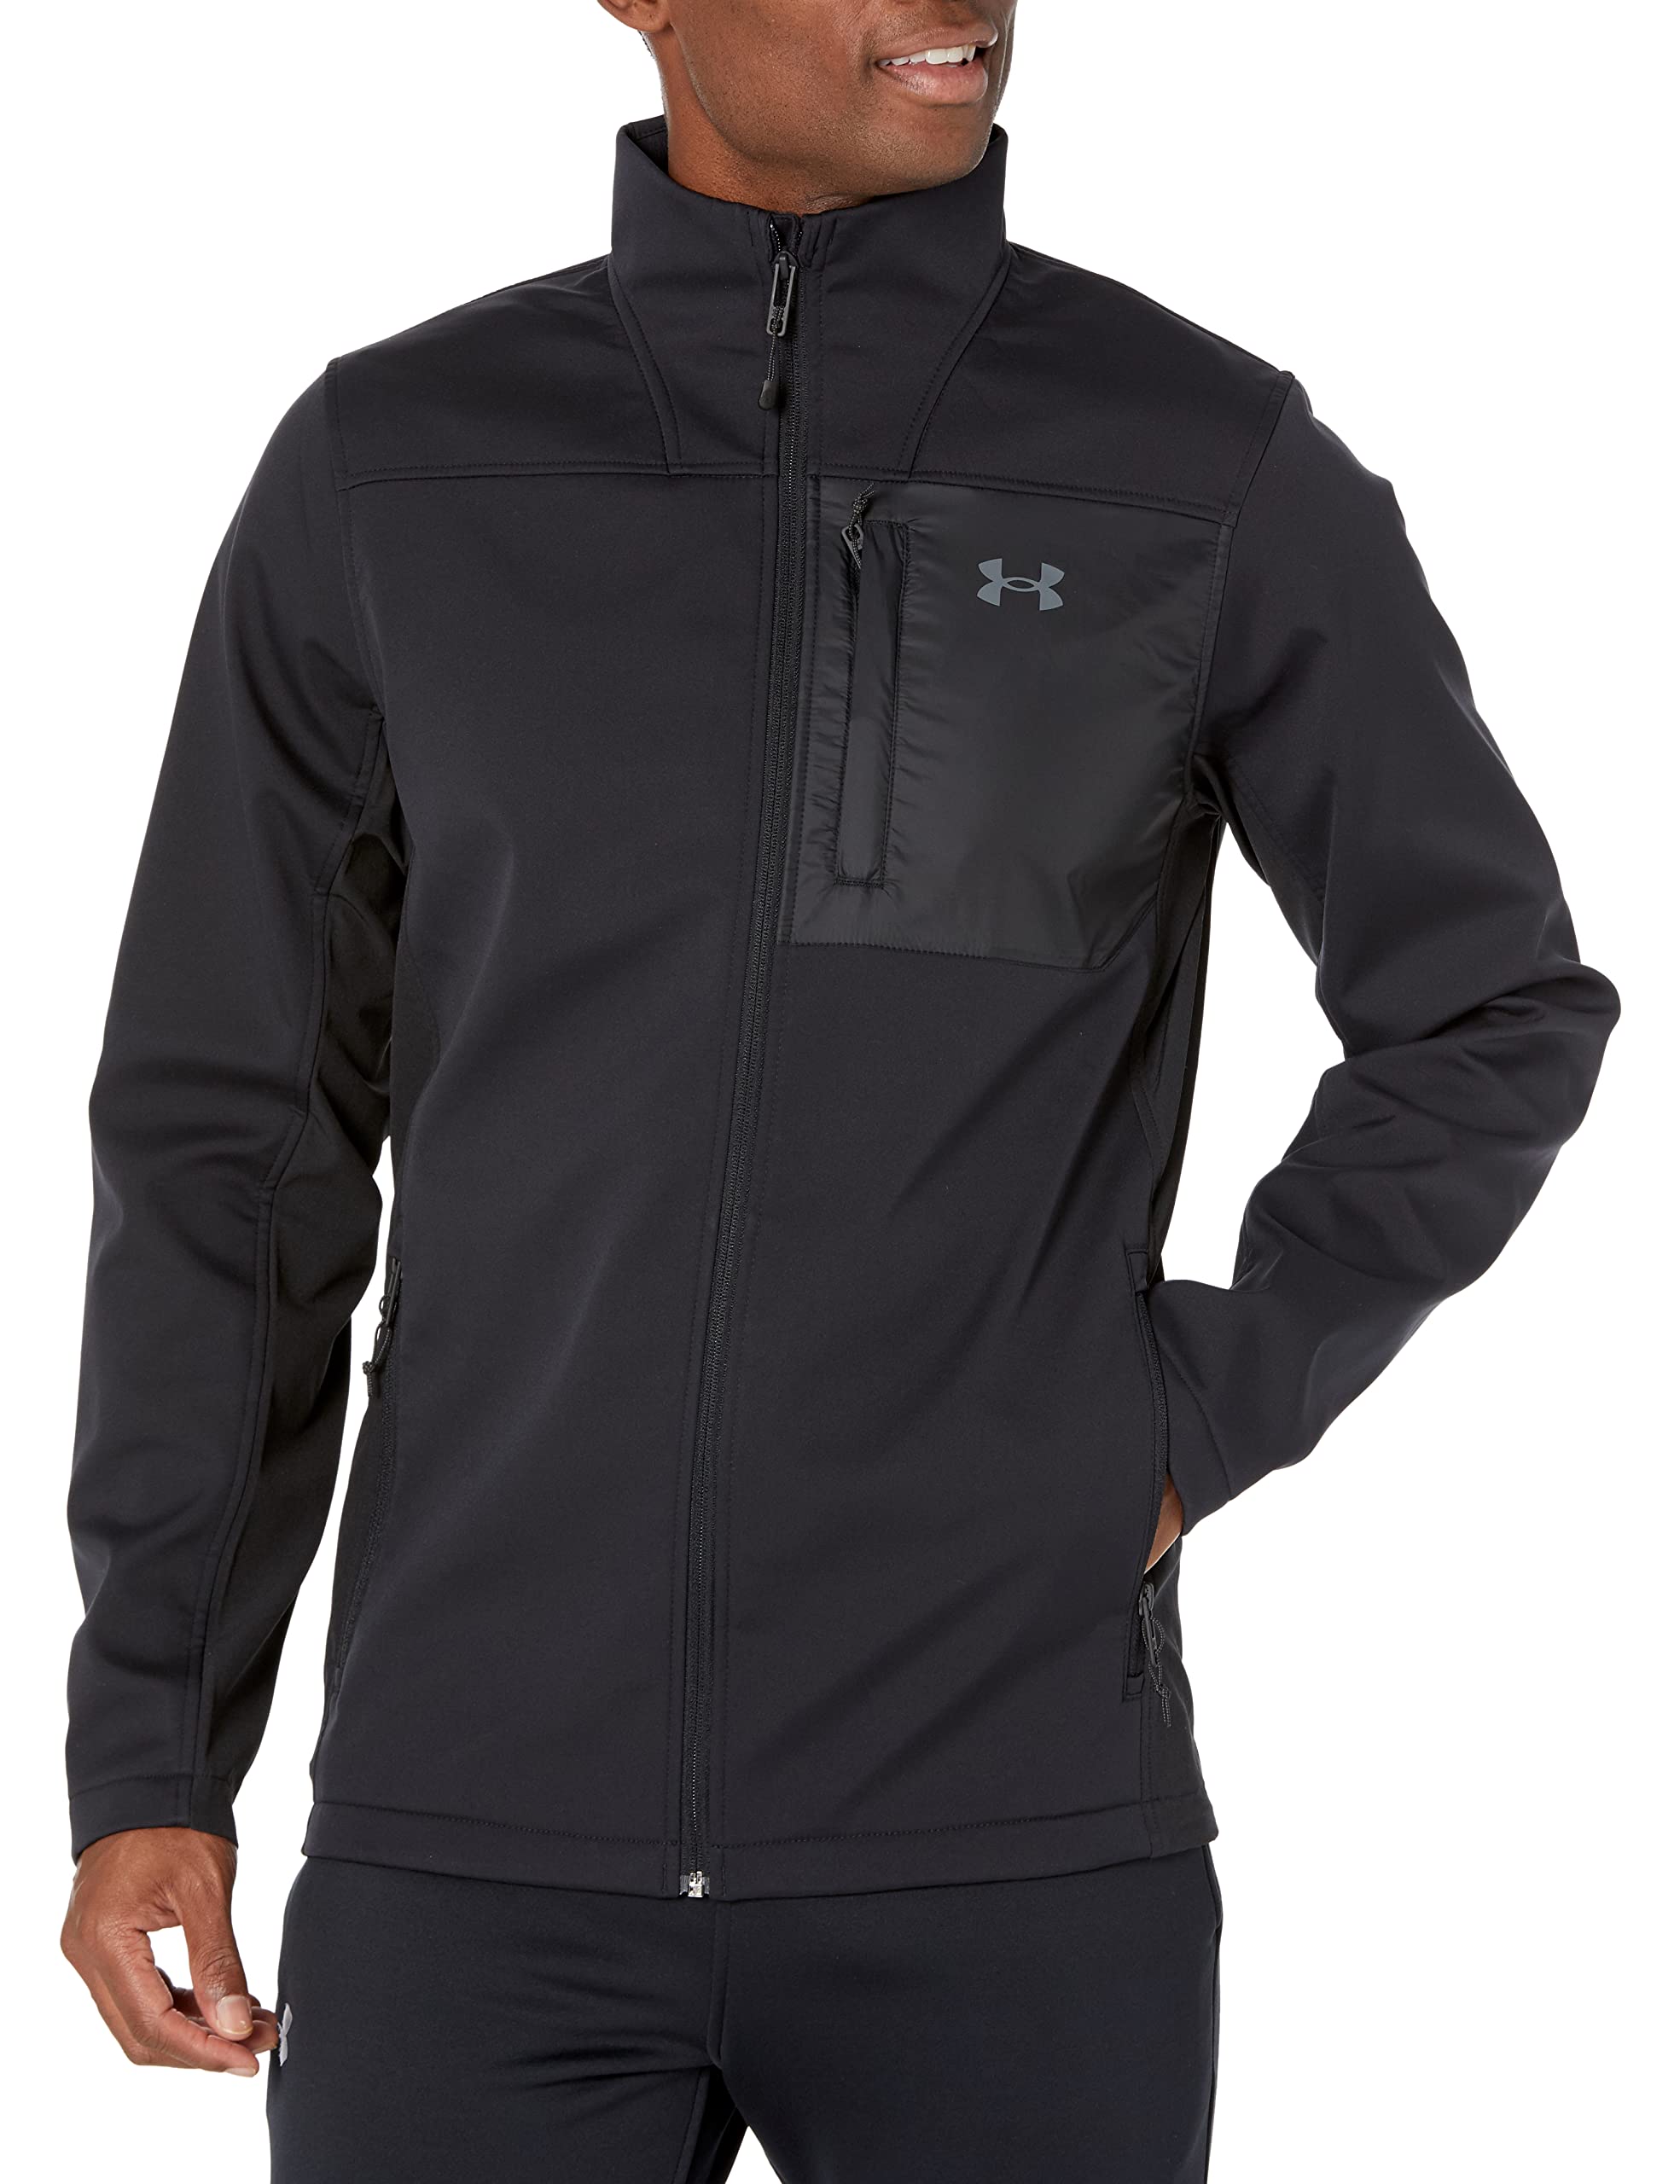 Under Armour Men's Coldgear Infrared Shield 2.0 Soft Shell